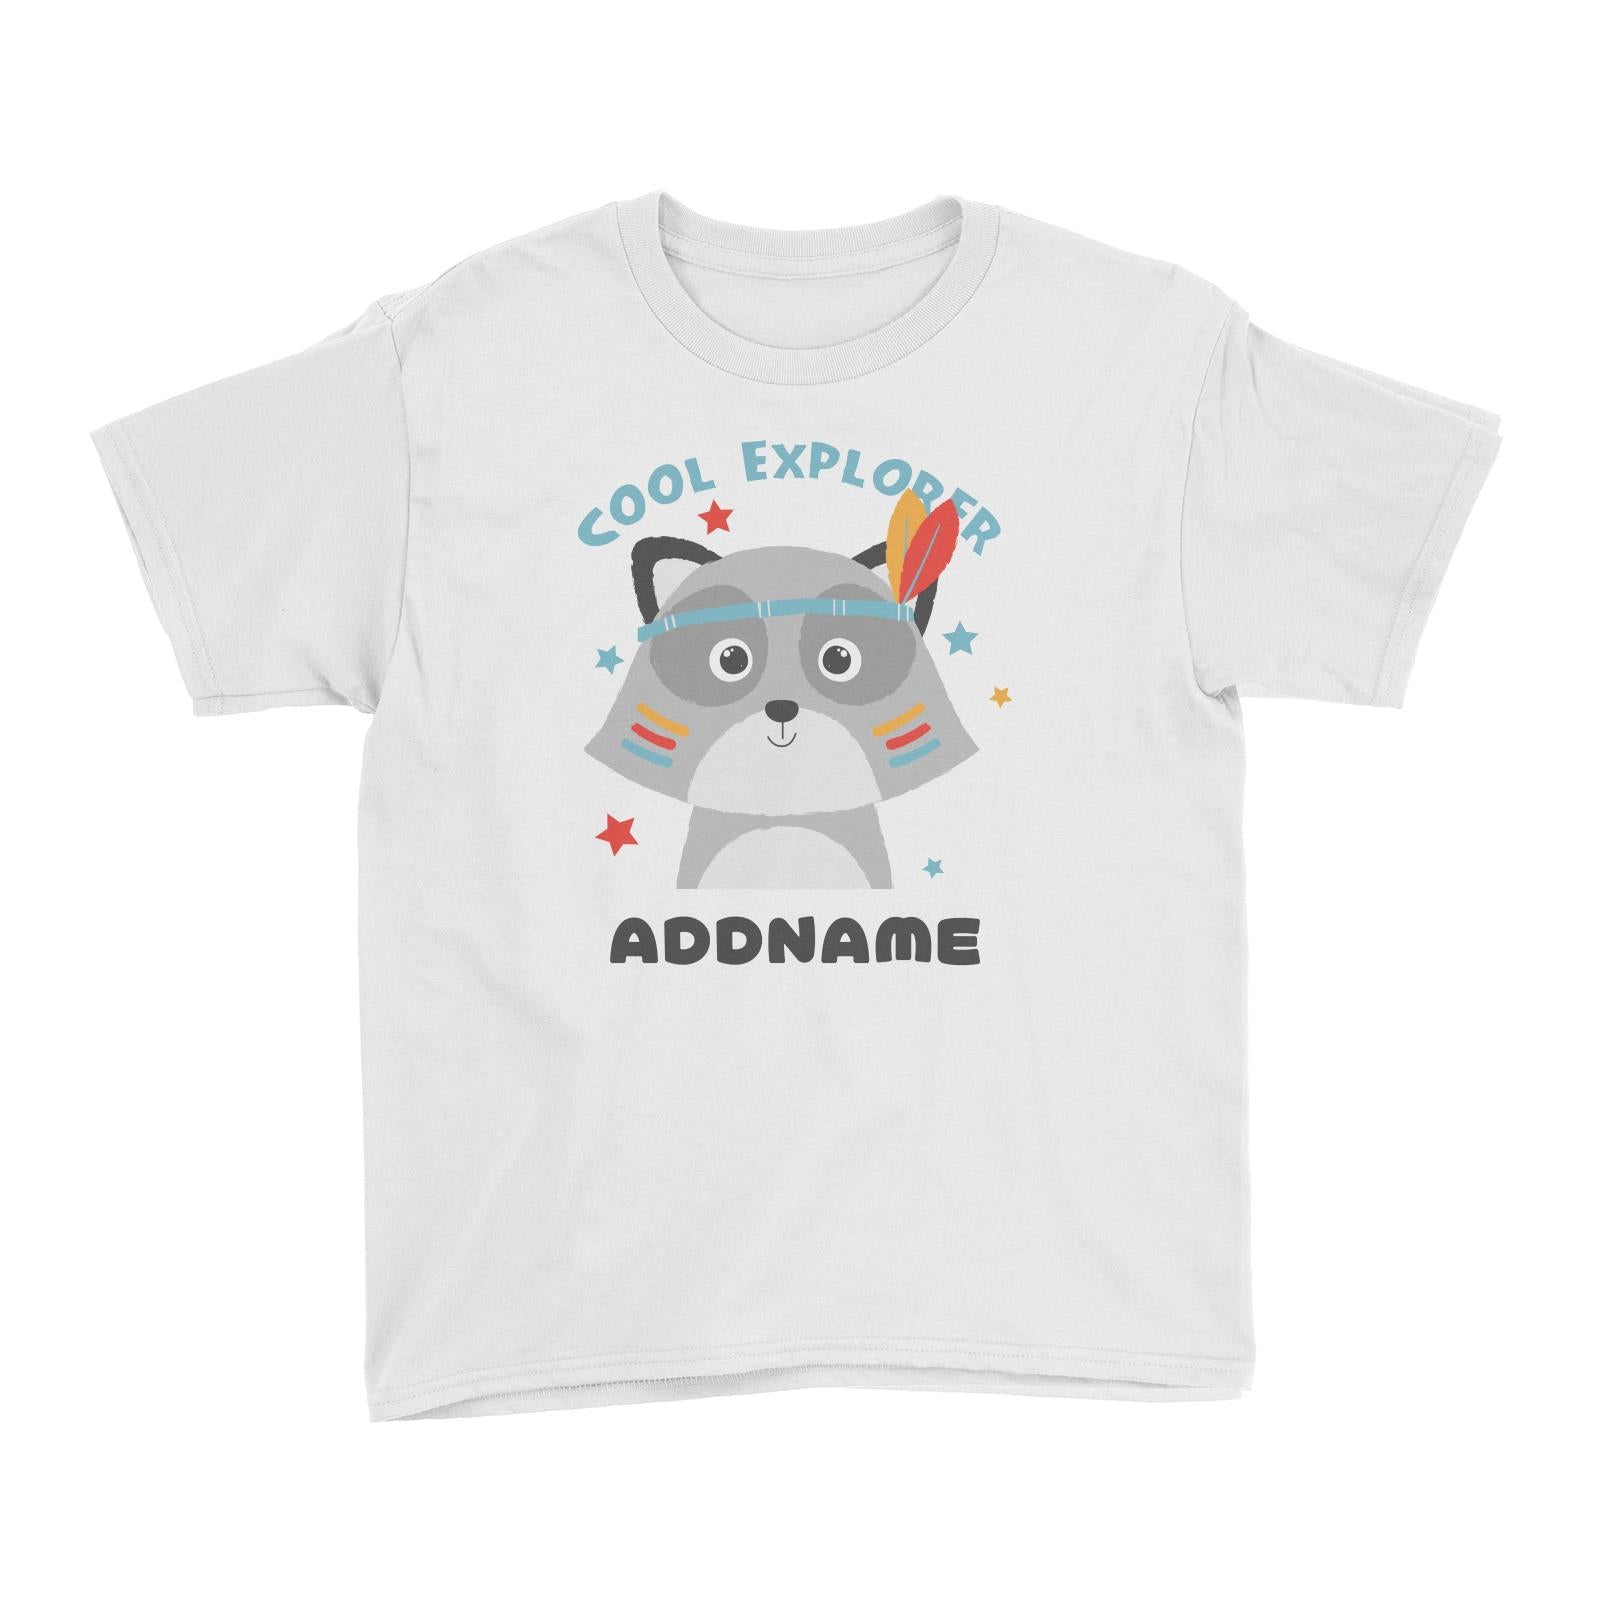 Cool Explorer Racoon Addname Kid's T-Shirt